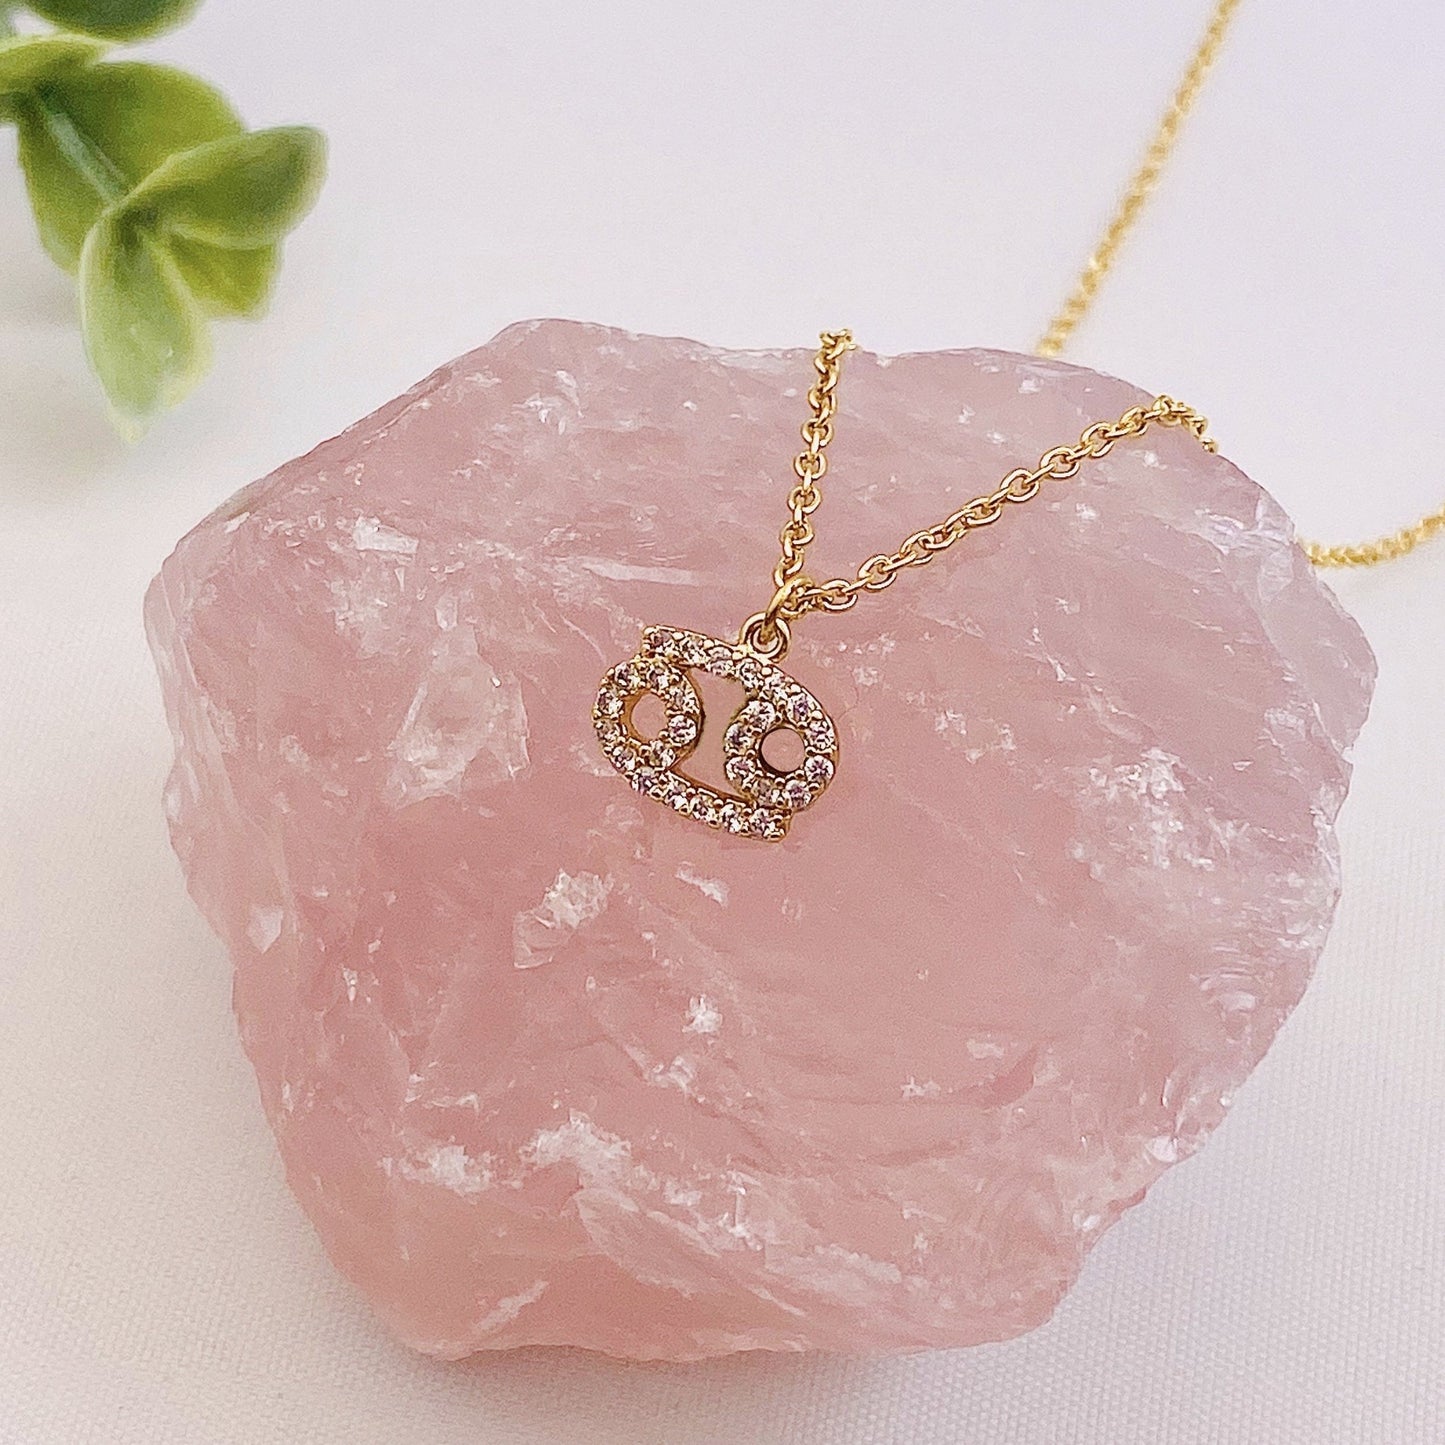 Delicate Cancer Necklace